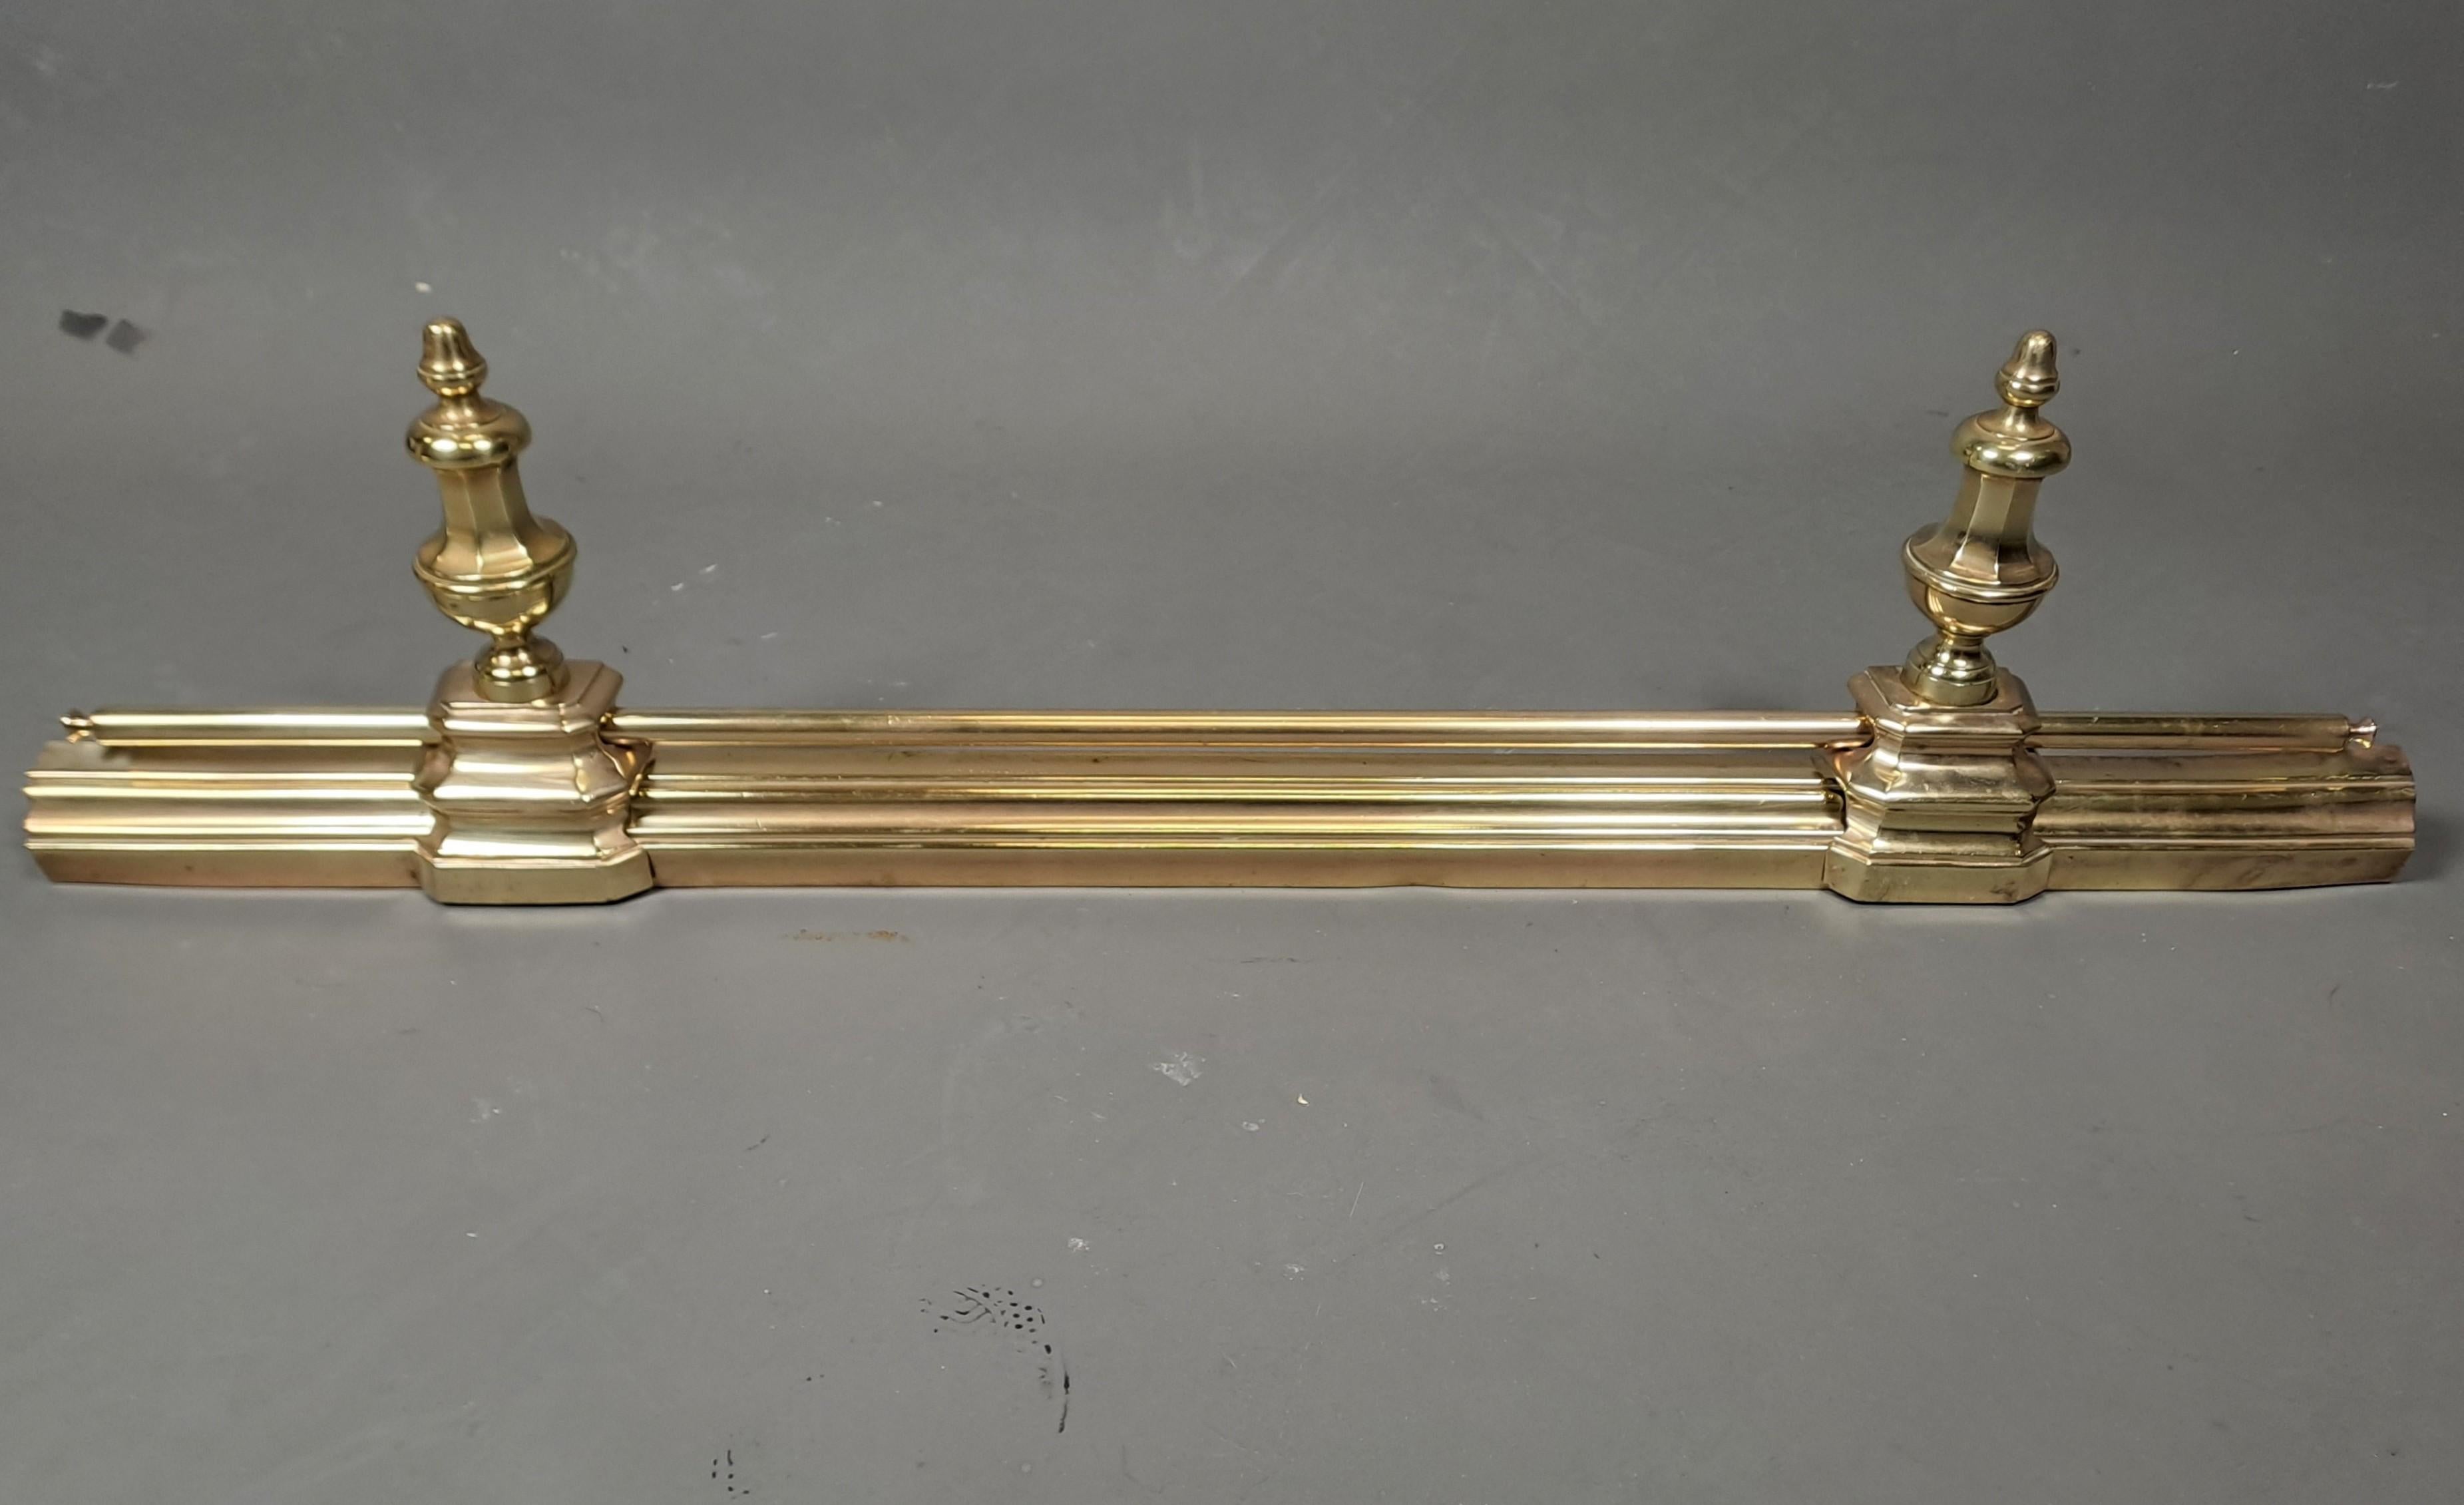 Polished bronze hearth bar, with two pinnacles and lateral cylindrical bar.

French work of good quality from the 19th century

Very good condition